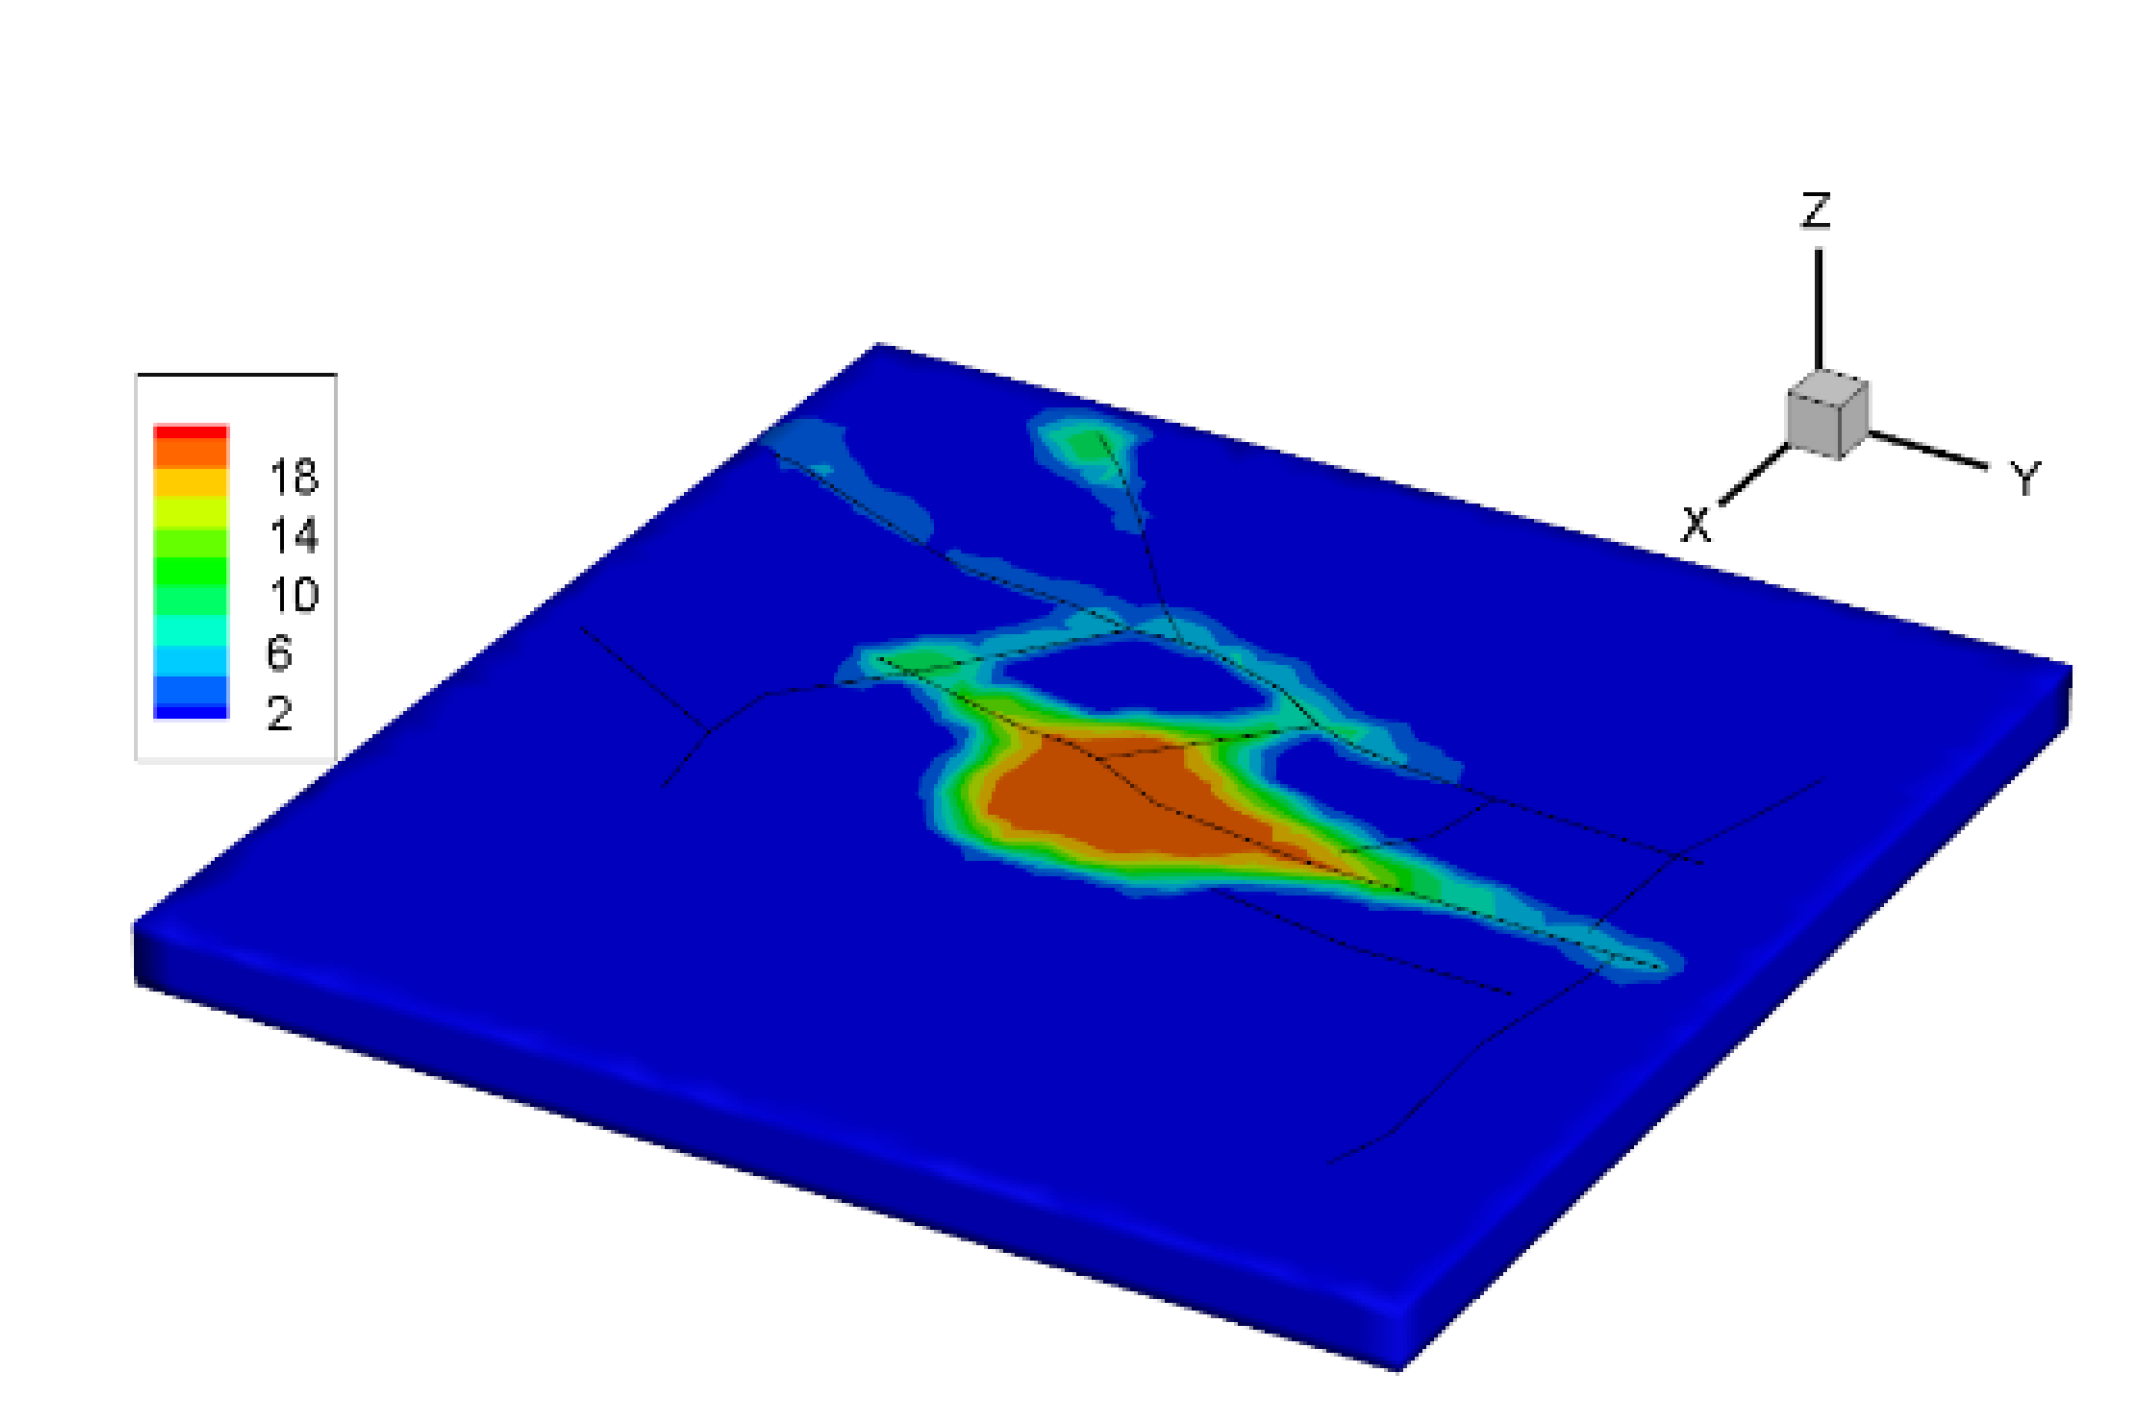 Energies | Free Full-Text | Discrete Fracture Modeling of 3D ...